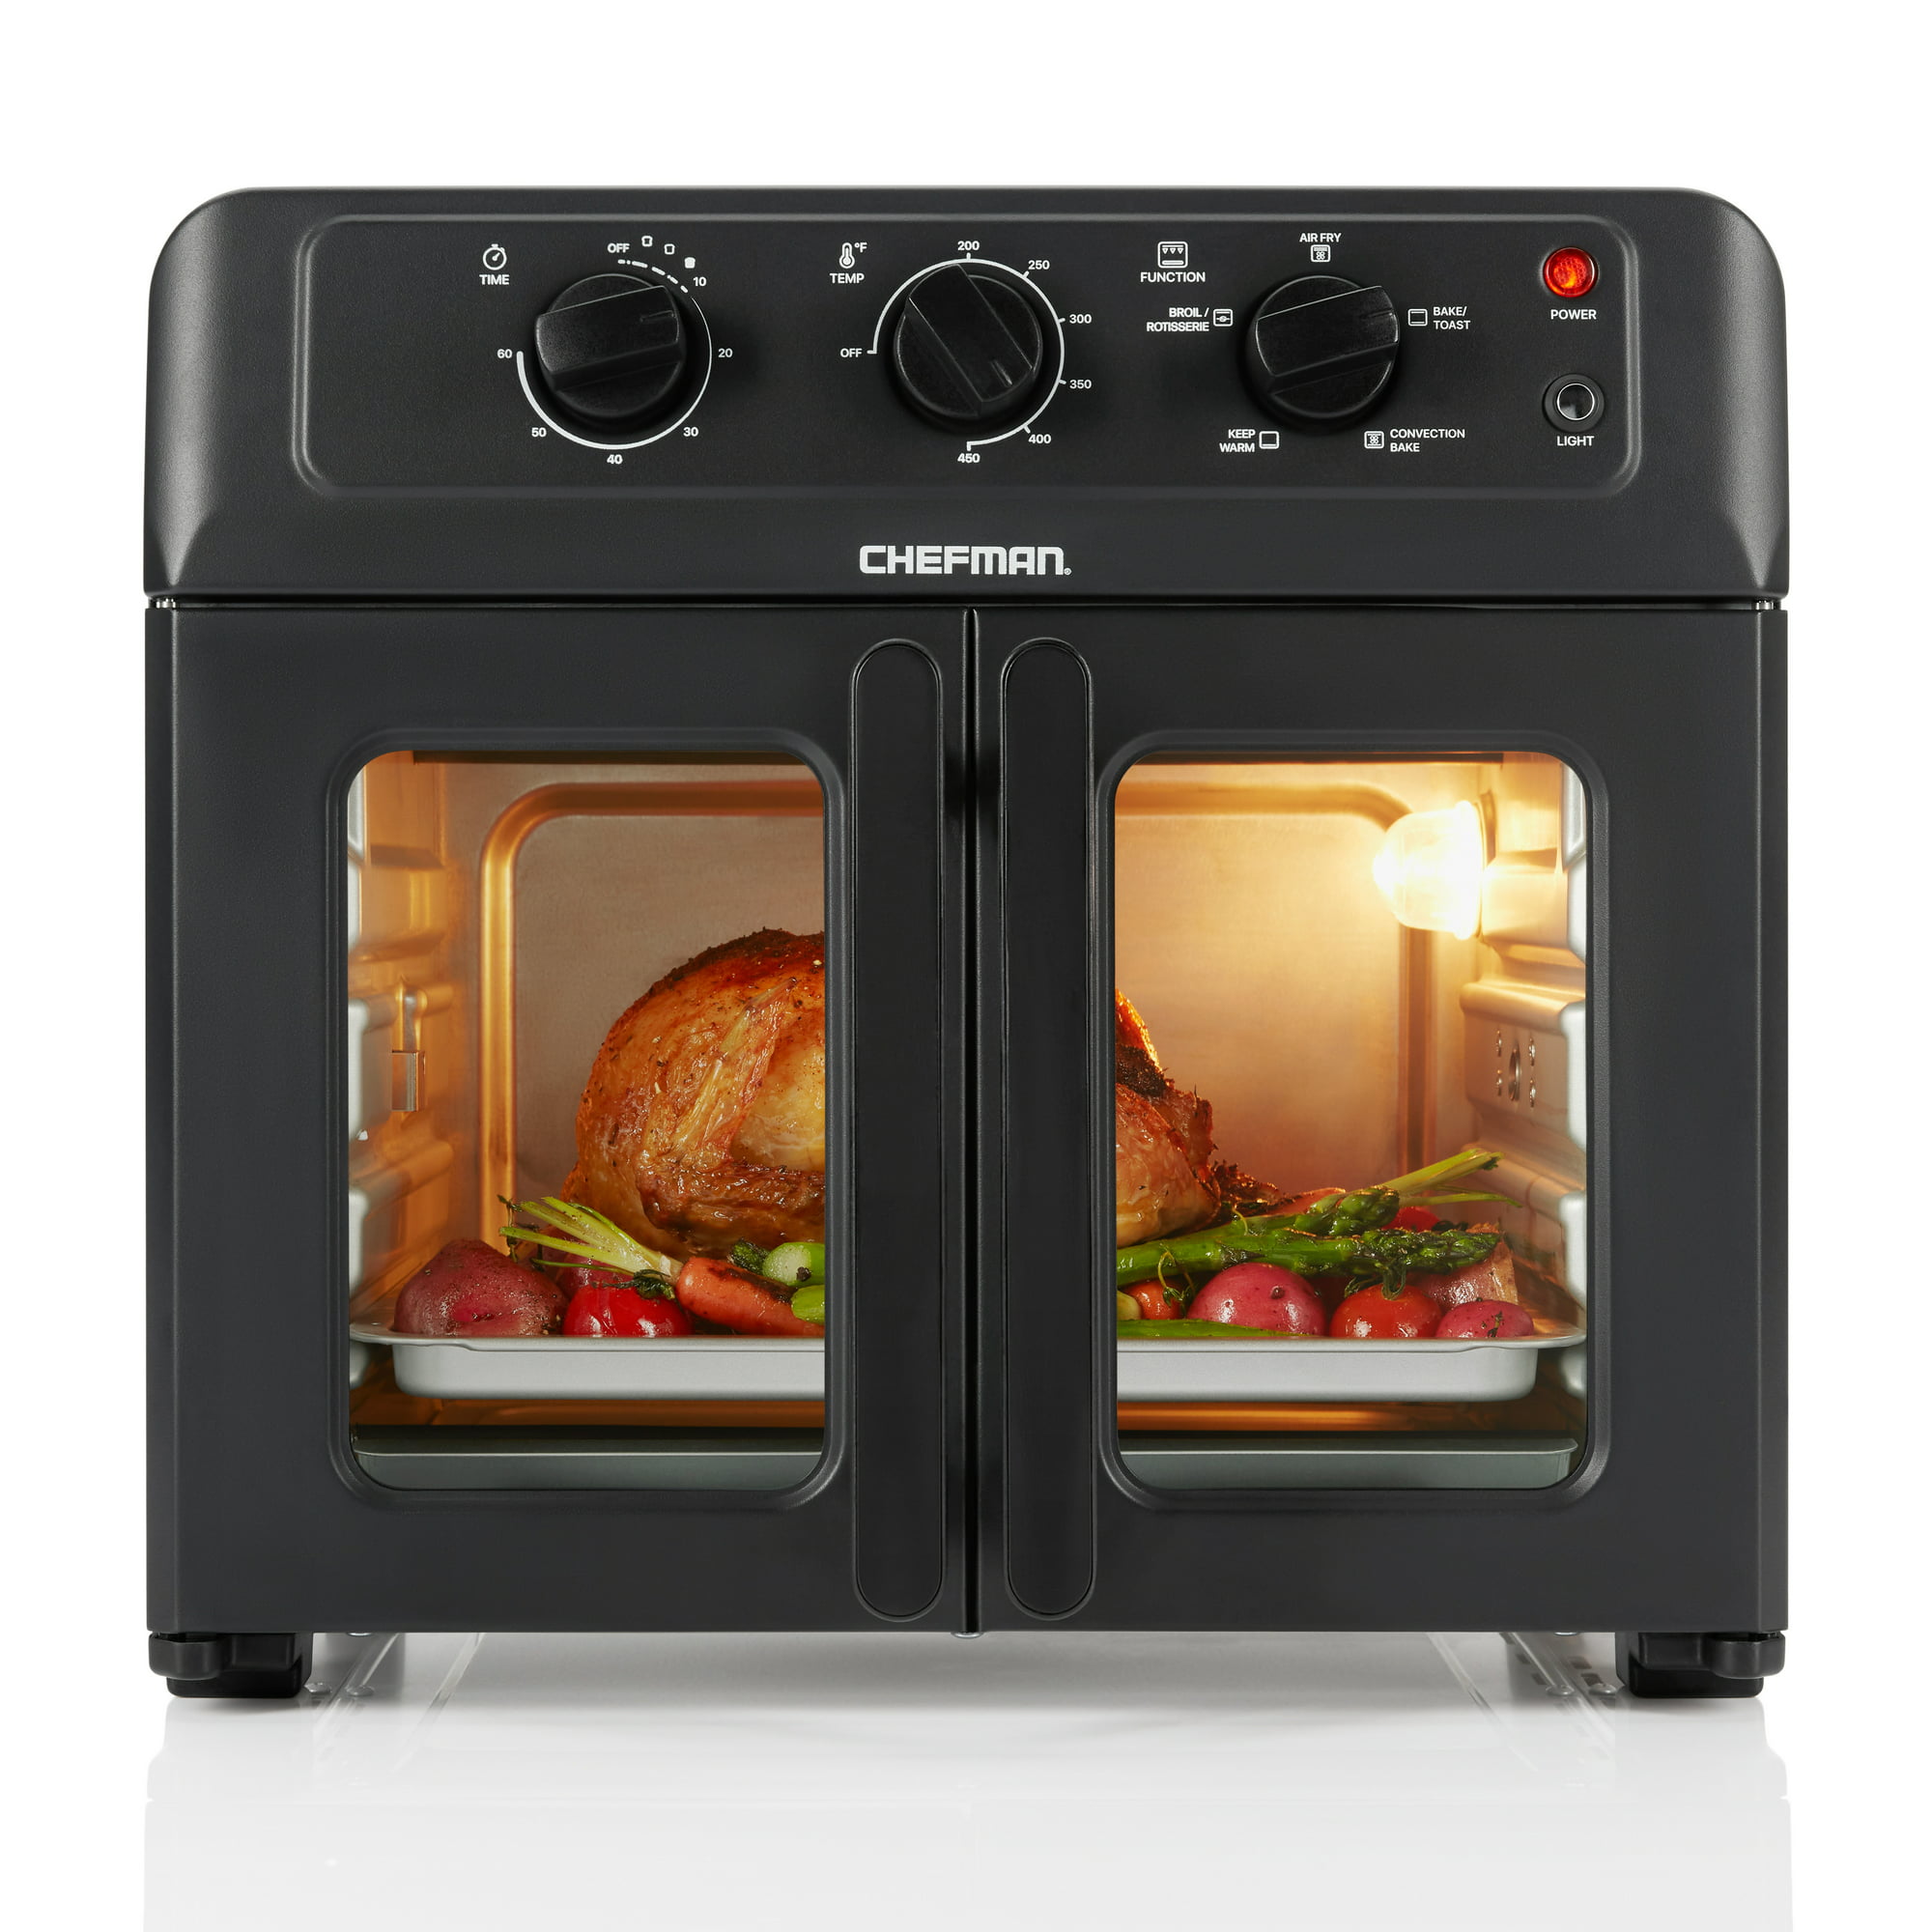 Chefman XL Air Fryer Oven w/ French Doors, 26 Qt Capacity, 5 Functions - Black, New - image 1 of 7